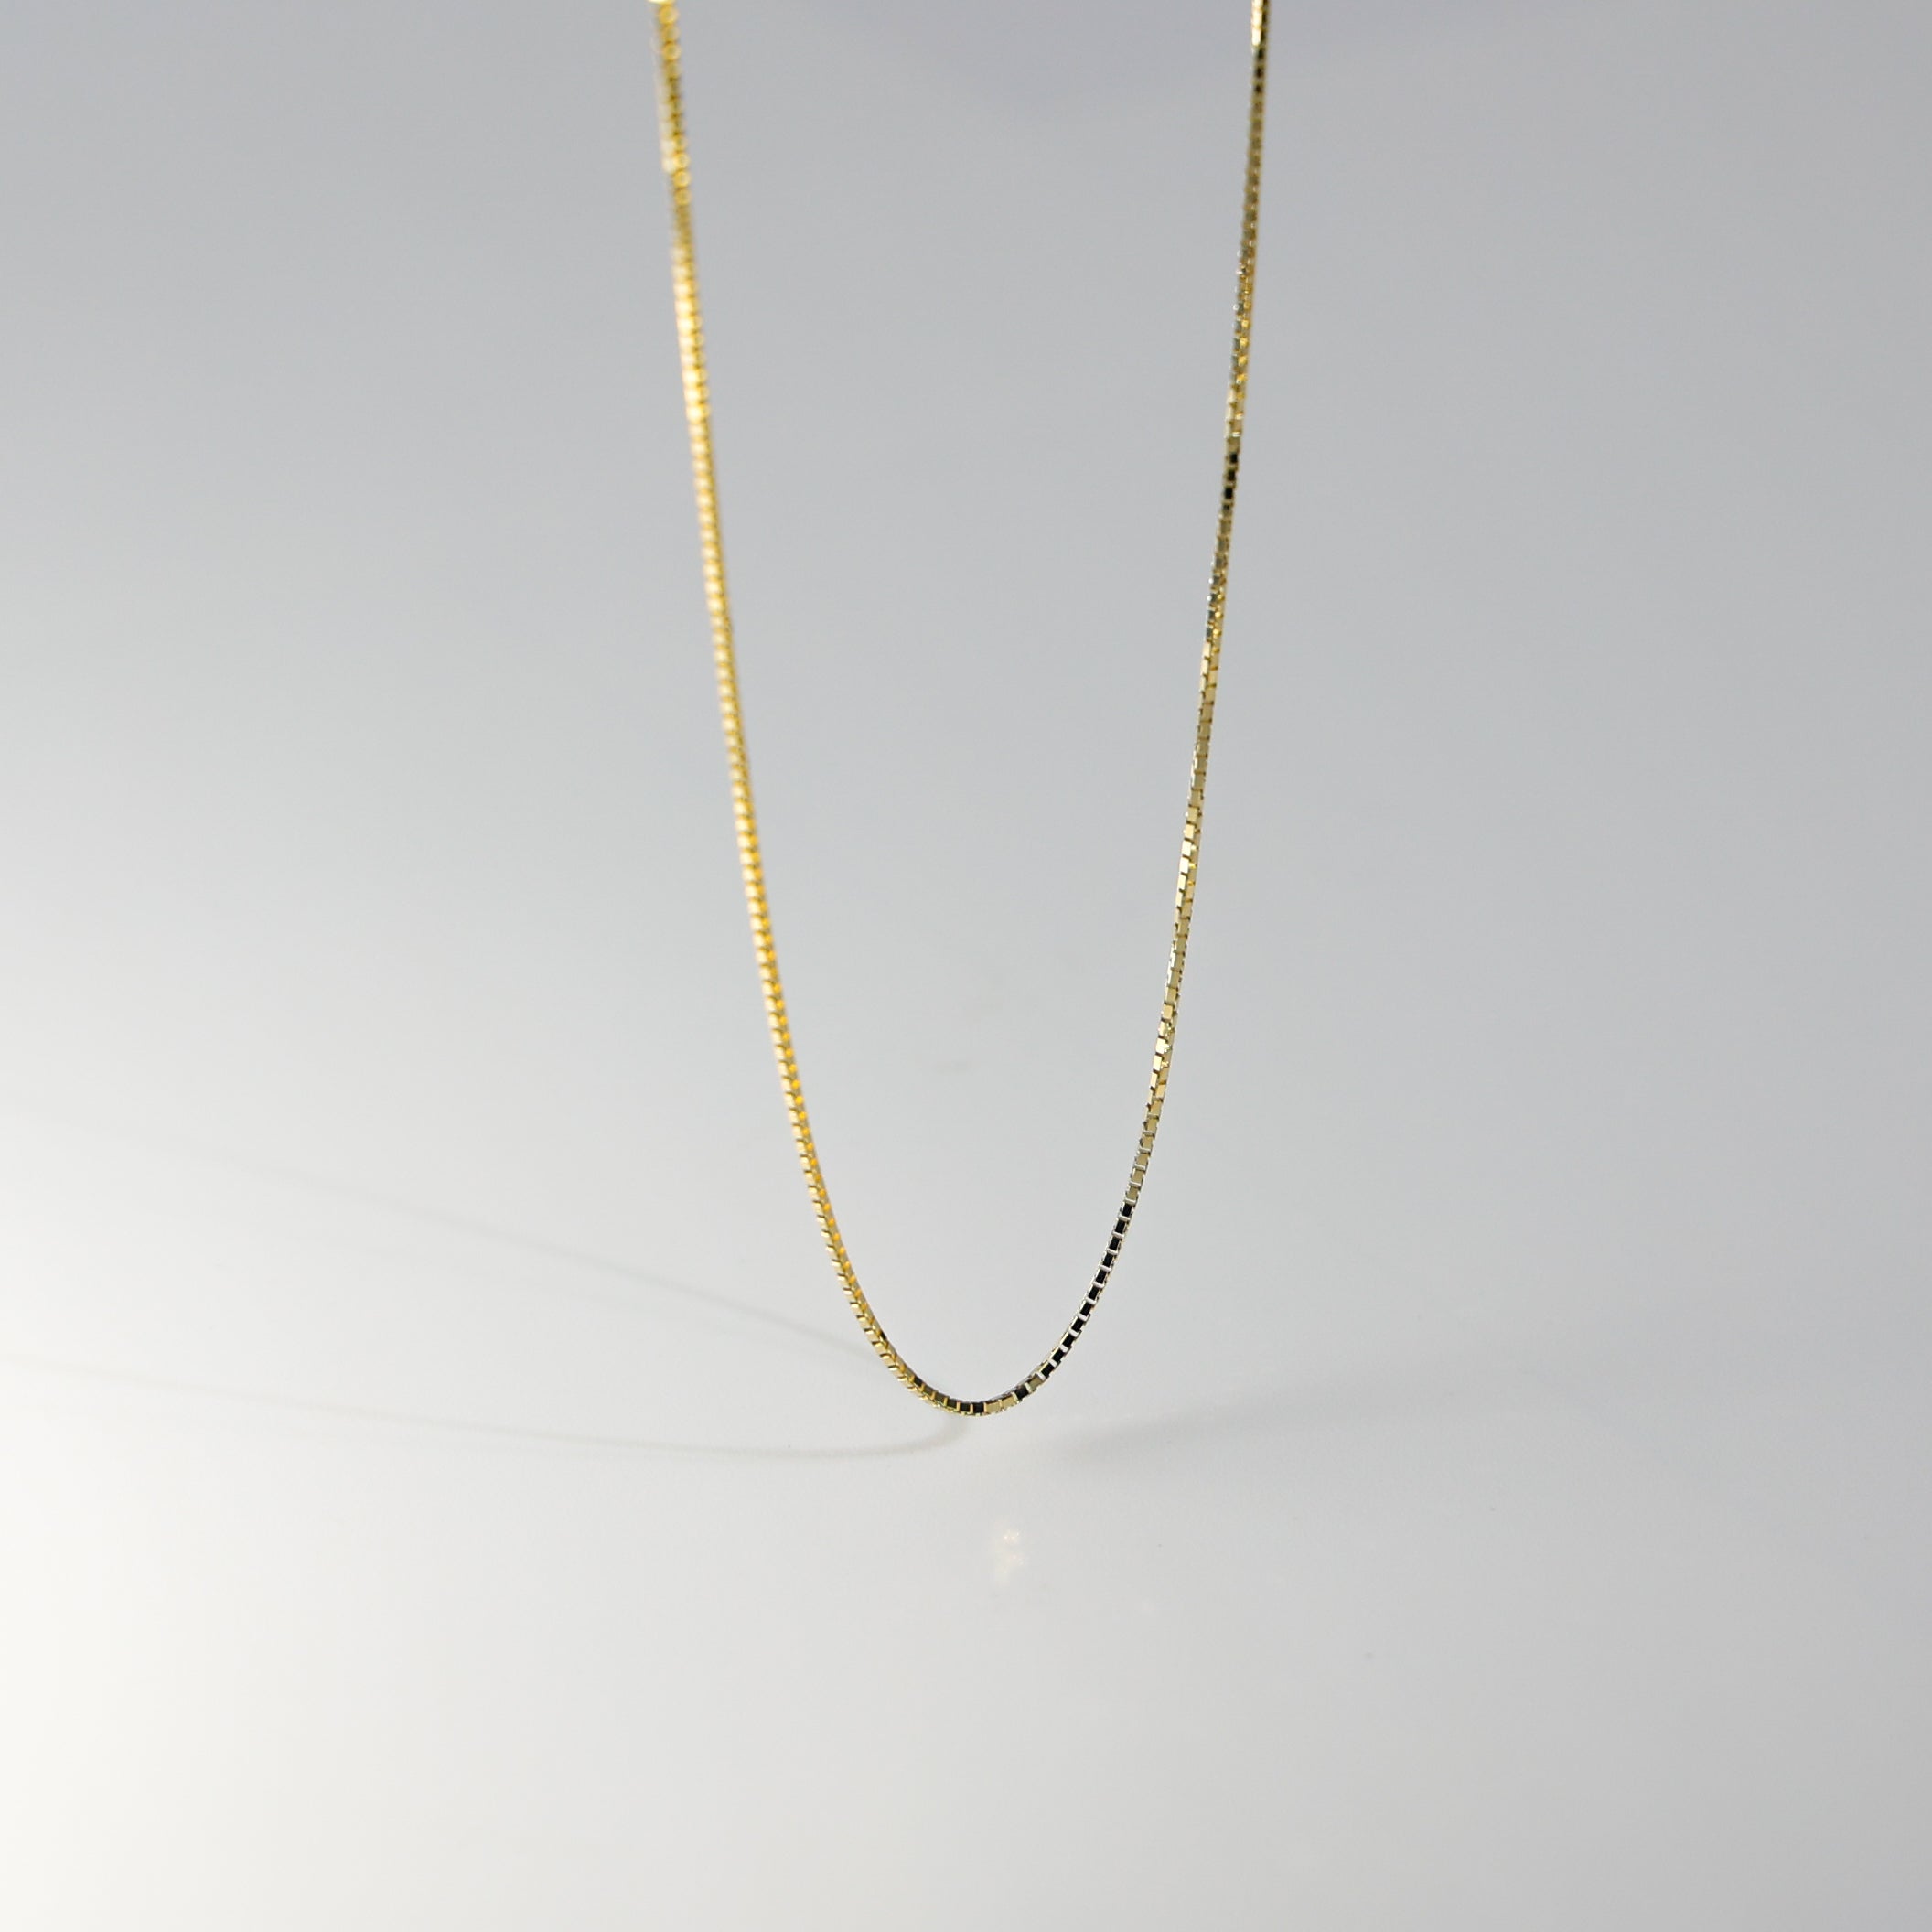 Gold 0.8mm Box Chain Necklace Model-0256 - Charlie & Co. Jewelry